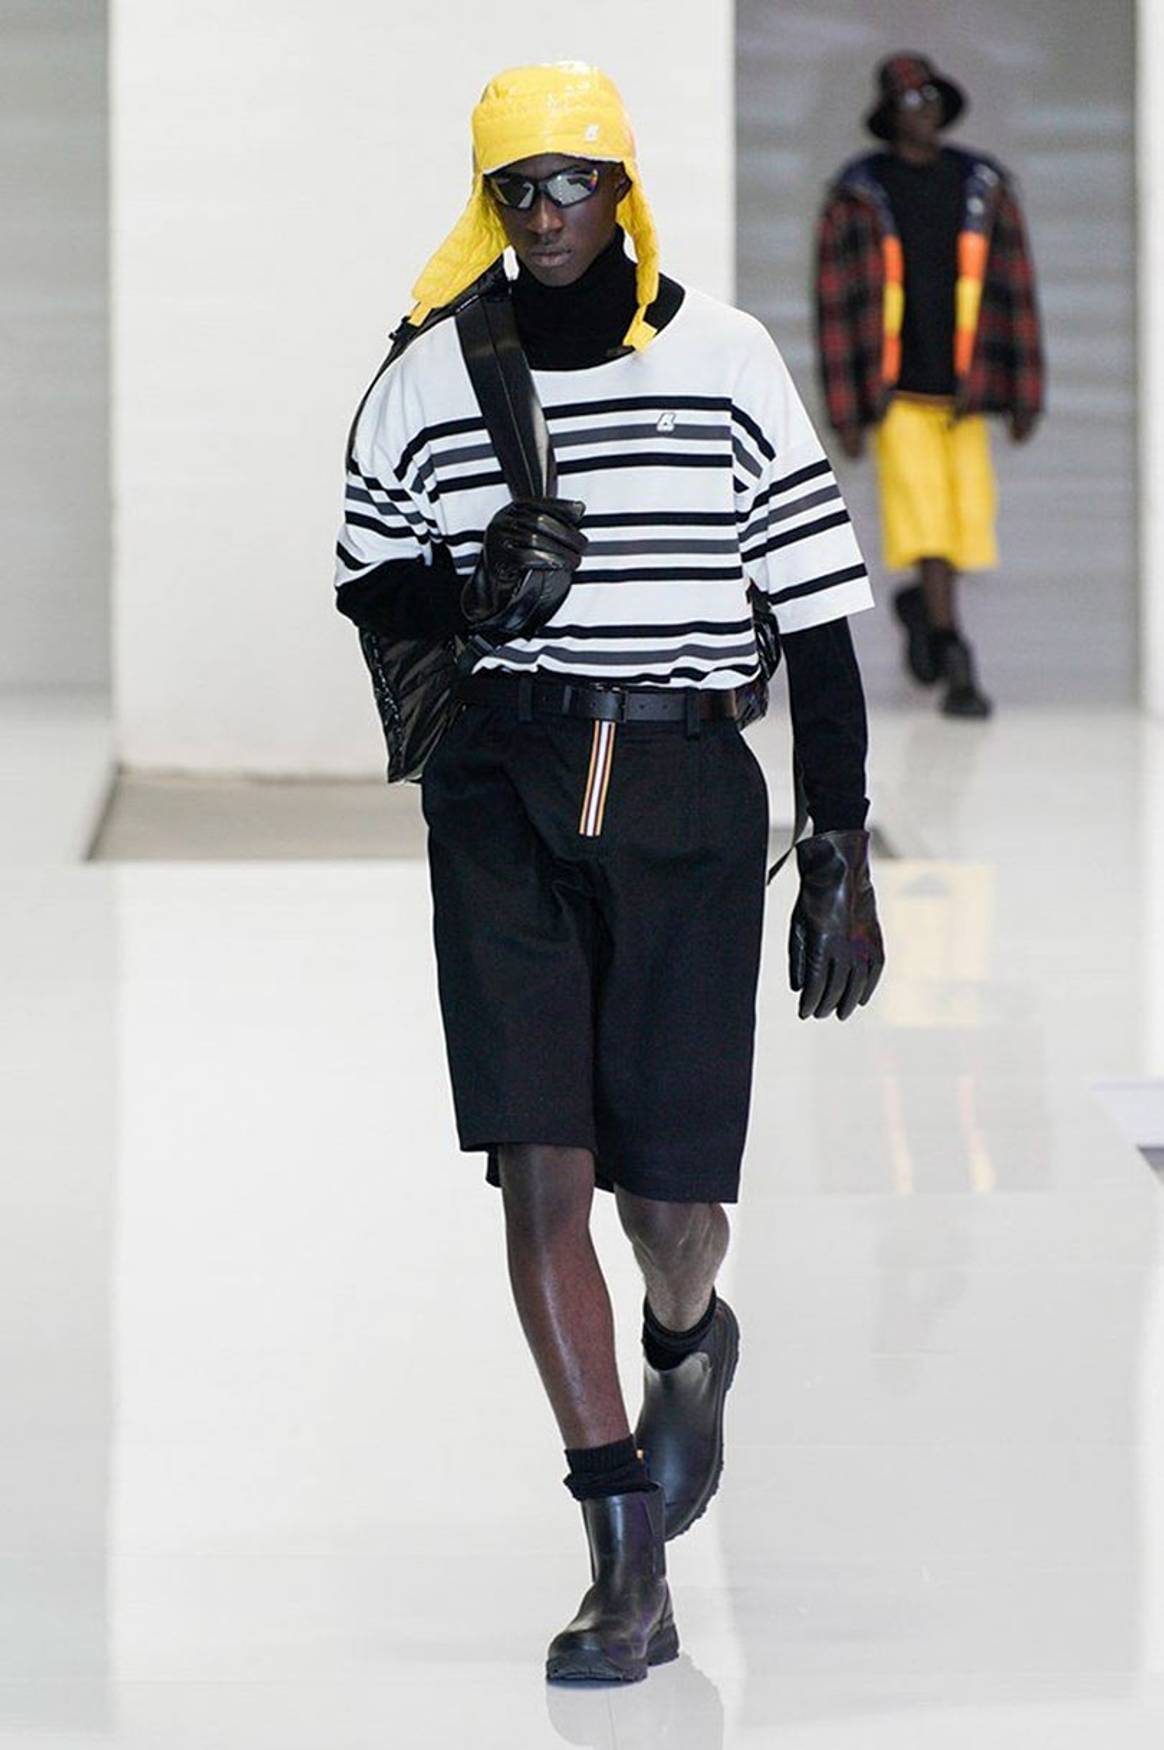 Milan menswear trends reflect the need for a brighter AW21